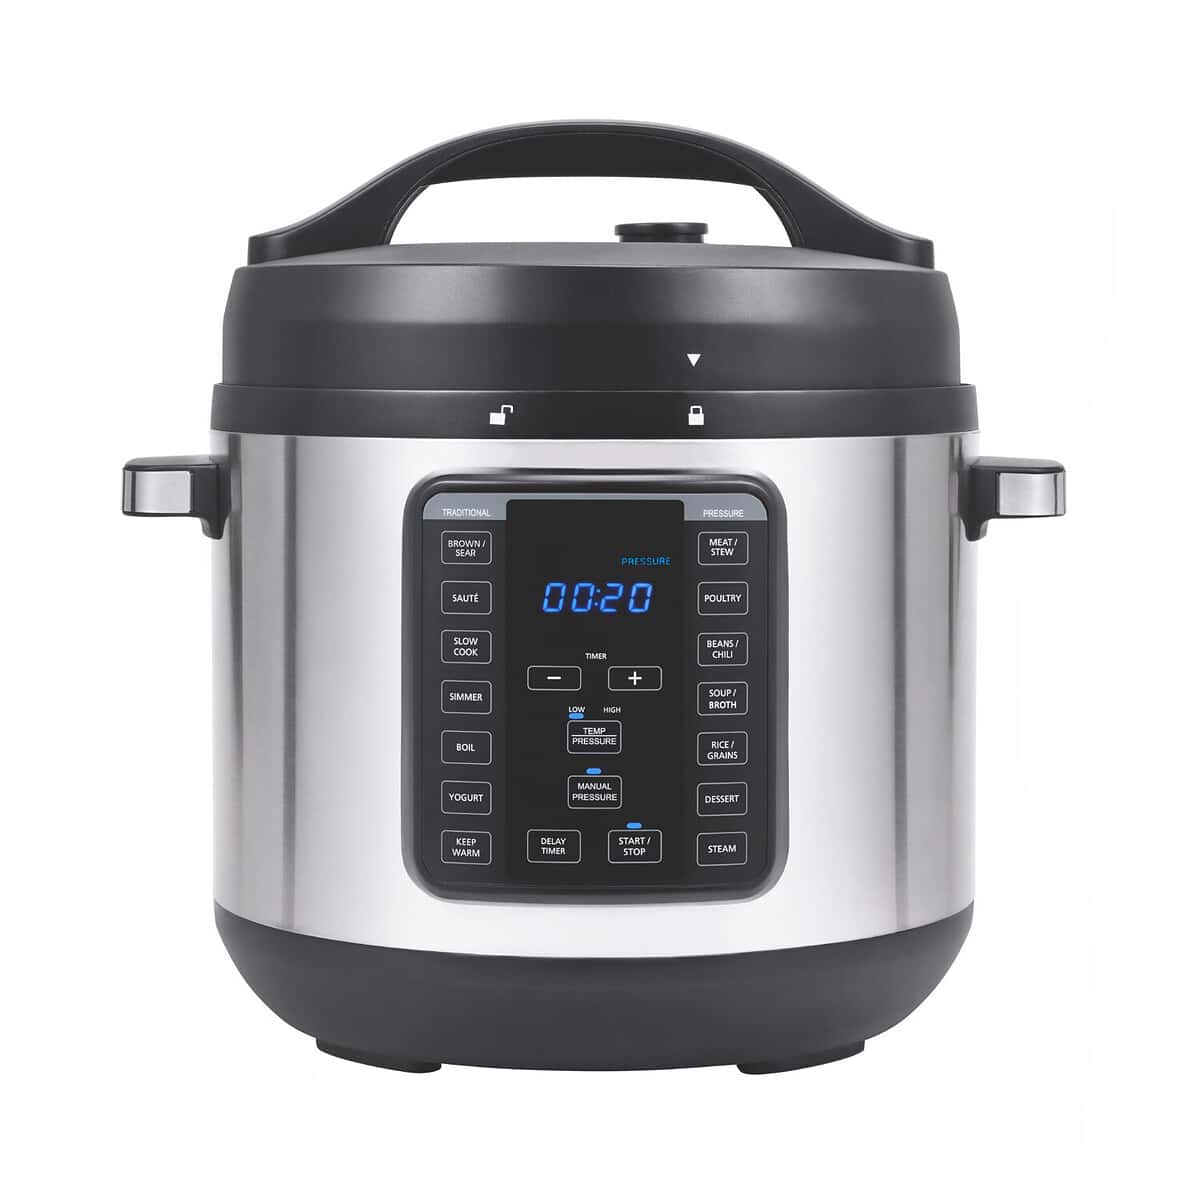 Electric Pressure Cooker Isolated on White. Front View of Modern Stainless Steel 8-in-1 Multi-Use Express Crock Programmable Slow Multi Cooker. Saute and Steamer. Domestic and Kitchen Appliances